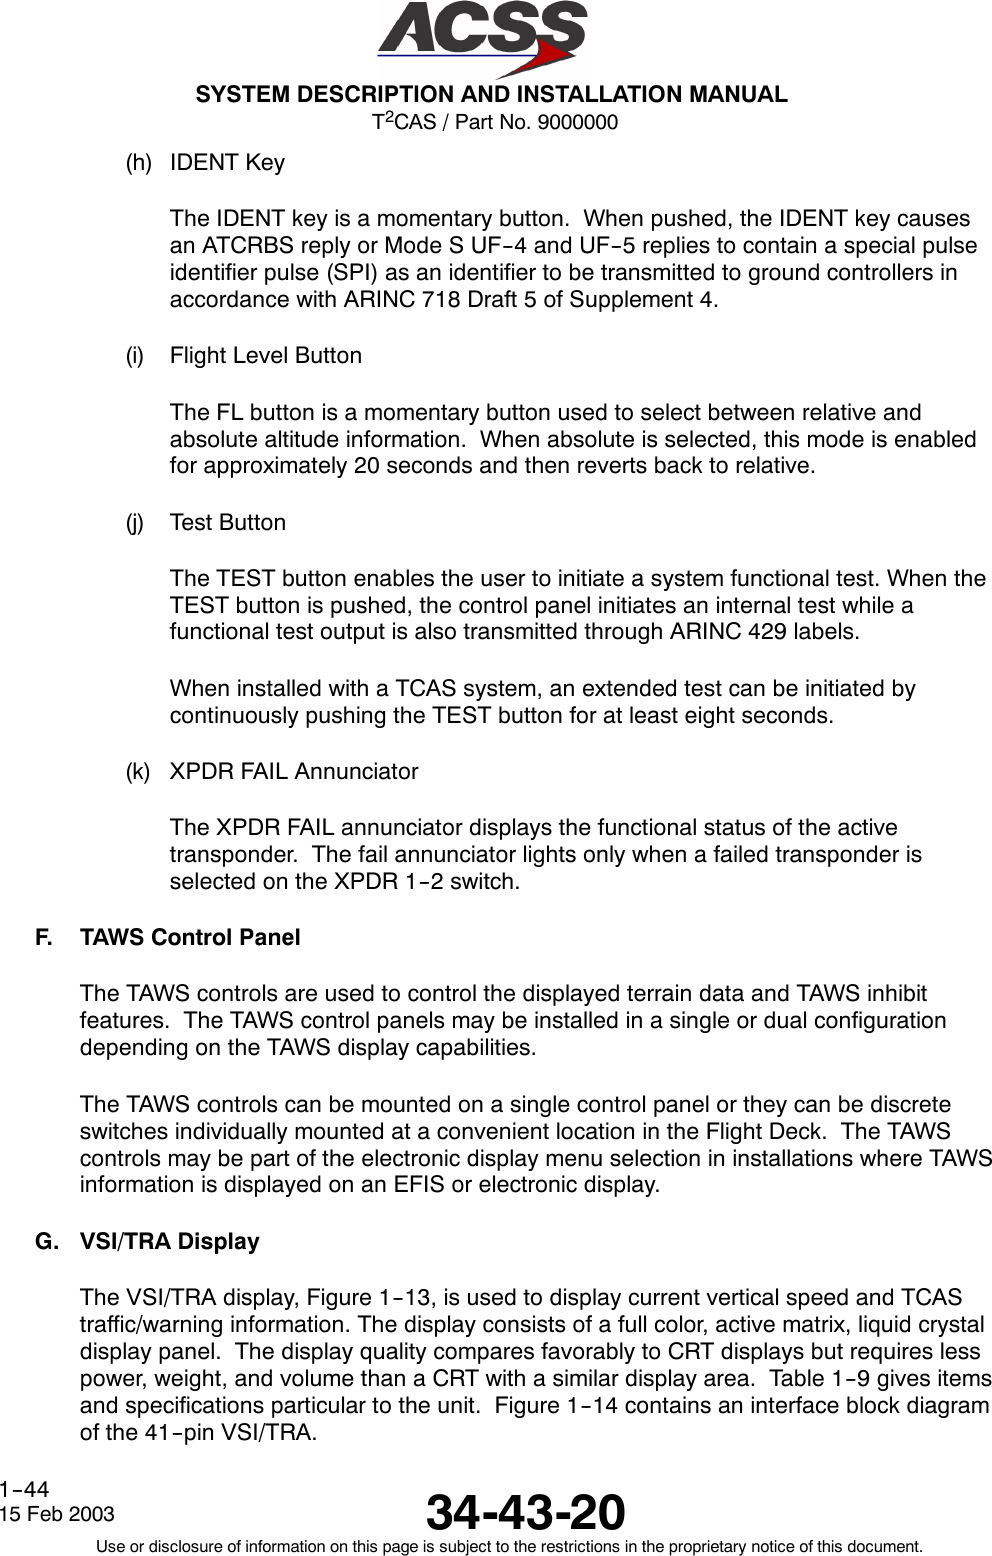 T2CAS / Part No. 9000000SYSTEM DESCRIPTION AND INSTALLATION MANUAL34-43-2015 Feb 2003Use or disclosure of information on this page is subject to the restrictions in the proprietary notice of this document.1--44(h) IDENT KeyThe IDENT key is a momentary button. When pushed, the IDENT key causesan ATCRBS reply or Mode S UF--4 and UF--5 replies to contain a special pulseidentifier pulse (SPI) as an identifier to be transmitted to ground controllers inaccordance with ARINC 718 Draft 5 of Supplement 4.(i) Flight Level ButtonThe FL button is a momentary button used to select between relative andabsolute altitude information. When absolute is selected, this mode is enabledfor approximately 20 seconds and then reverts back to relative.(j) Test ButtonThe TEST button enables the user to initiate a system functional test. When theTEST button is pushed, the control panel initiates an internal test while afunctional test output is also transmitted through ARINC 429 labels.When installed with a TCAS system, an extended test can be initiated bycontinuously pushing the TEST button for at least eight seconds.(k) XPDR FAIL AnnunciatorThe XPDR FAIL annunciator displays the functional status of the activetransponder. The fail annunciator lights only when a failed transponder isselected on the XPDR 1--2 switch.F. TAWS Control PanelThe TAWS controls are used to control the displayed terrain data and TAWS inhibitfeatures. The TAWS control panels may be installed in a single or dual configurationdepending on the TAWS display capabilities.The TAWS controls can be mounted on a single control panel or they can be discreteswitches individually mounted at a convenient location in the Flight Deck. The TAWScontrols may be part of the electronic display menu selection in installations where TAWSinformation is displayed on an EFIS or electronic display.G. VSI/TRA DisplayThe VSI/TRA display, Figure 1--13, is used to display current vertical speed and TCAStraffic/warning information. The display consists of a full color, active matrix, liquid crystaldisplay panel. The display quality compares favorably to CRT displays but requires lesspower, weight, and volume than a CRT with a similar display area. Table 1--9 gives itemsand specifications particular to the unit. Figure 1--14 contains an interface block diagramof the 41--pin VSI/TRA.